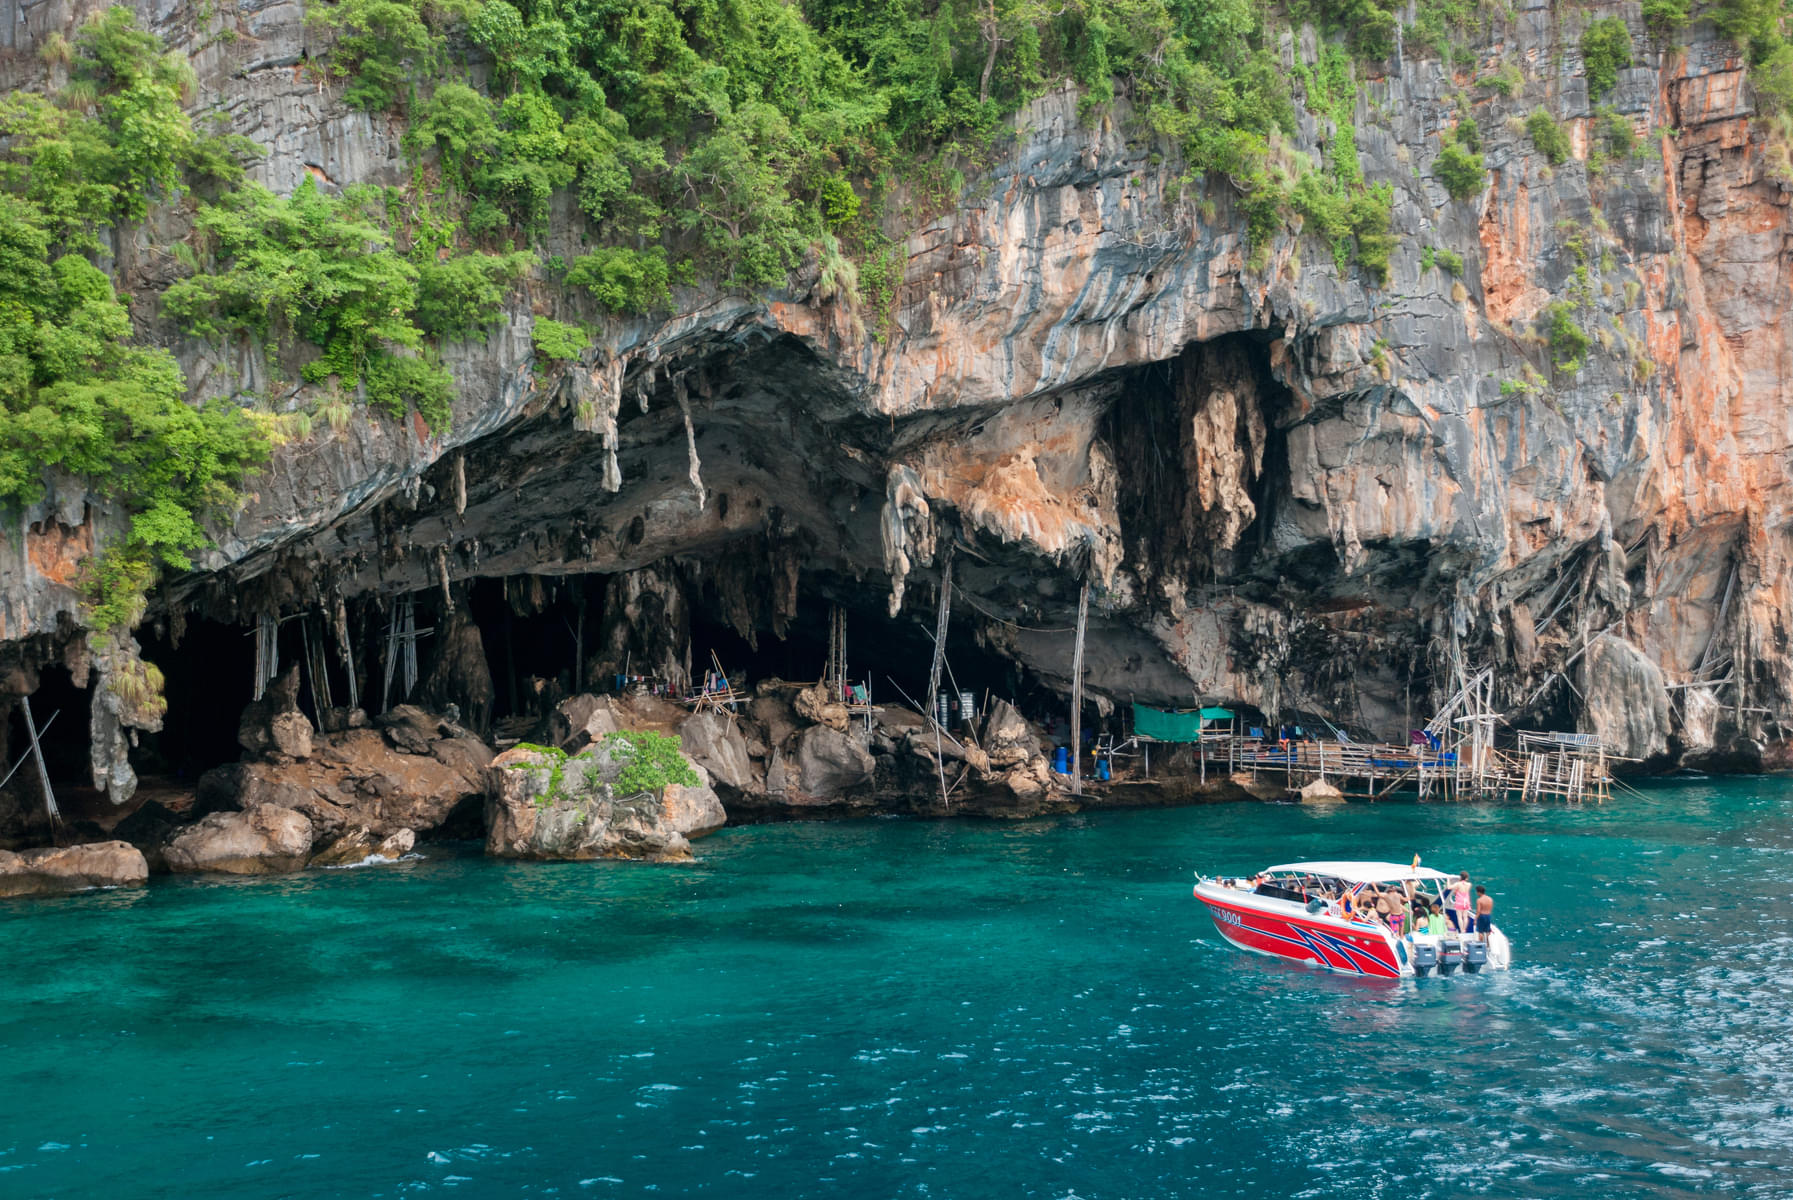 Discover mysterious caves, limestone cliffs